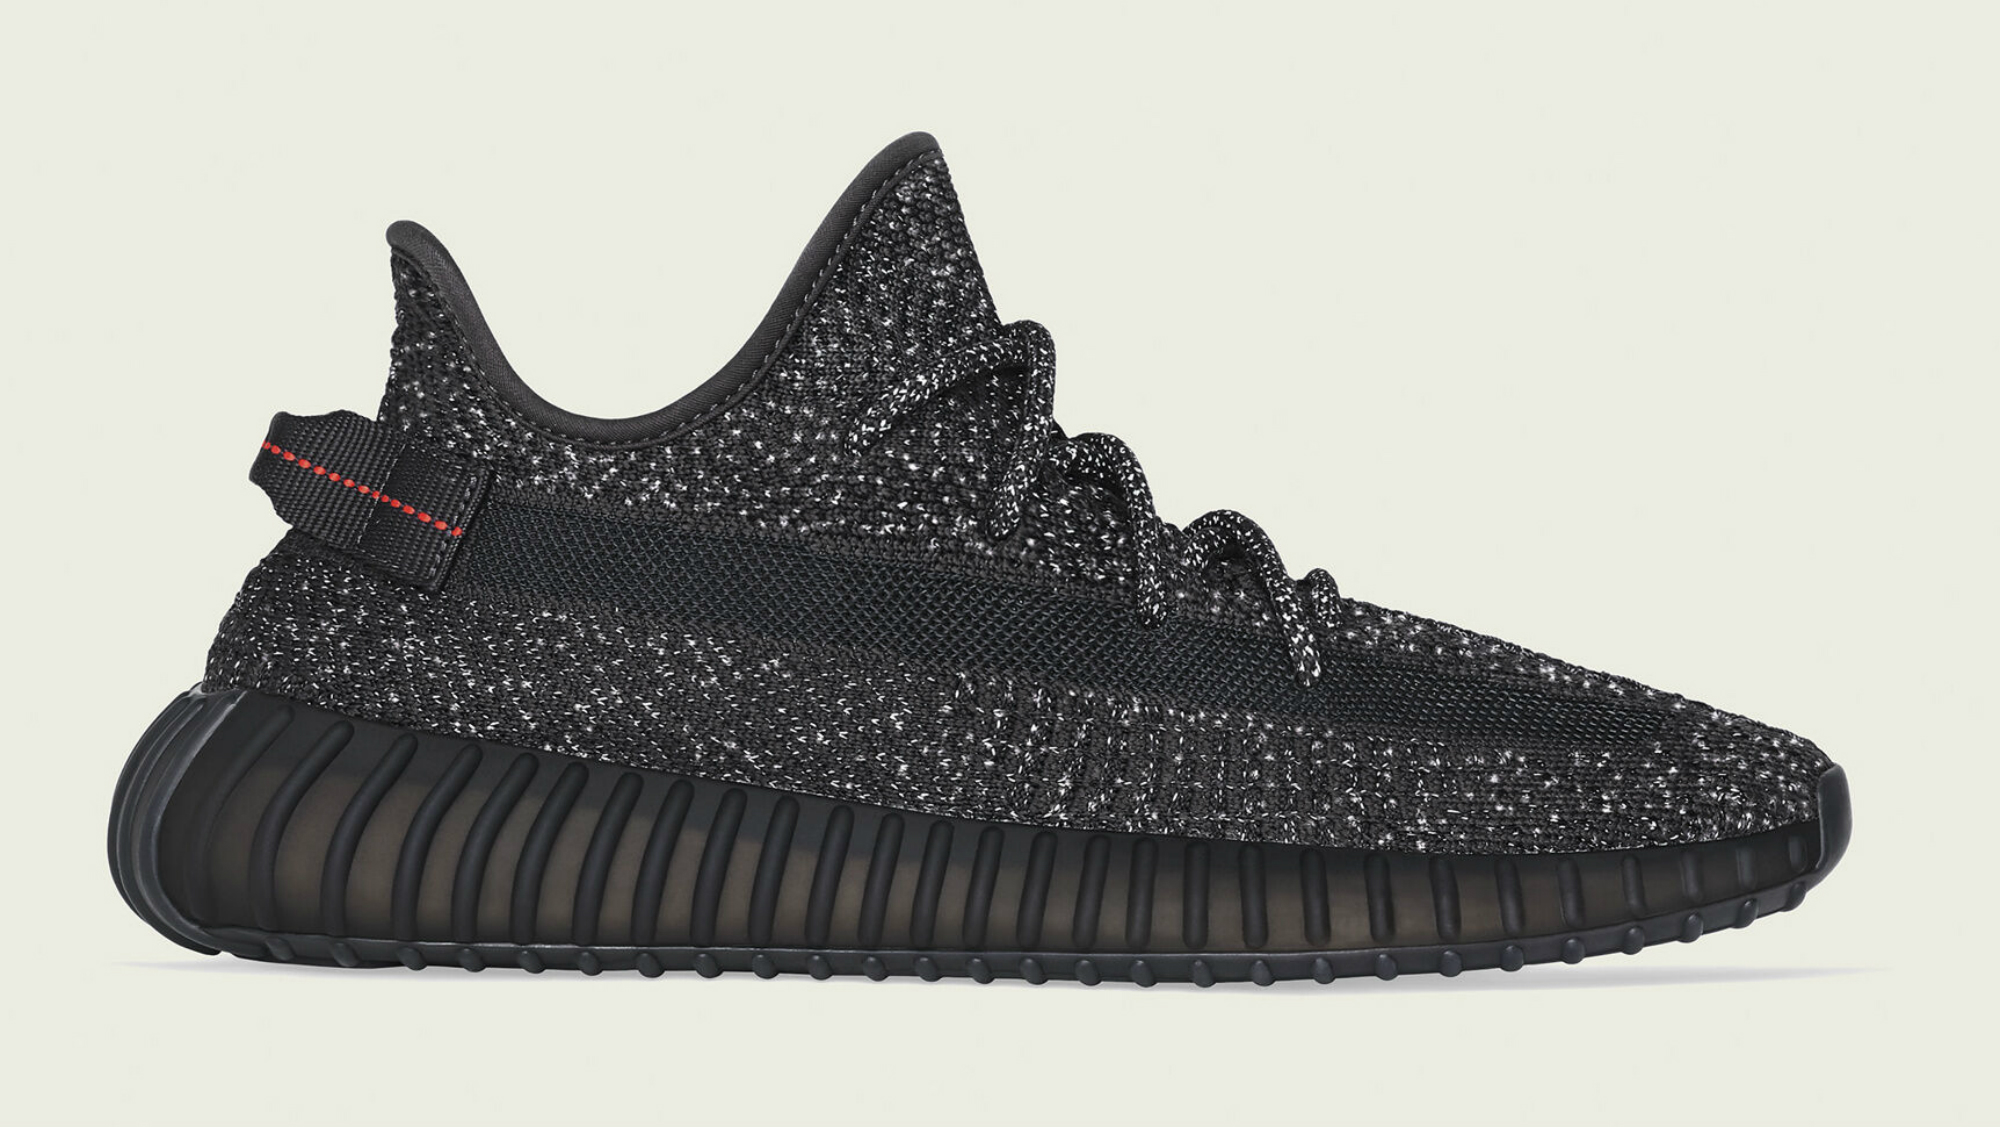 Cape peregrination anmodning The Complete Yeezy Price Guide | Complex